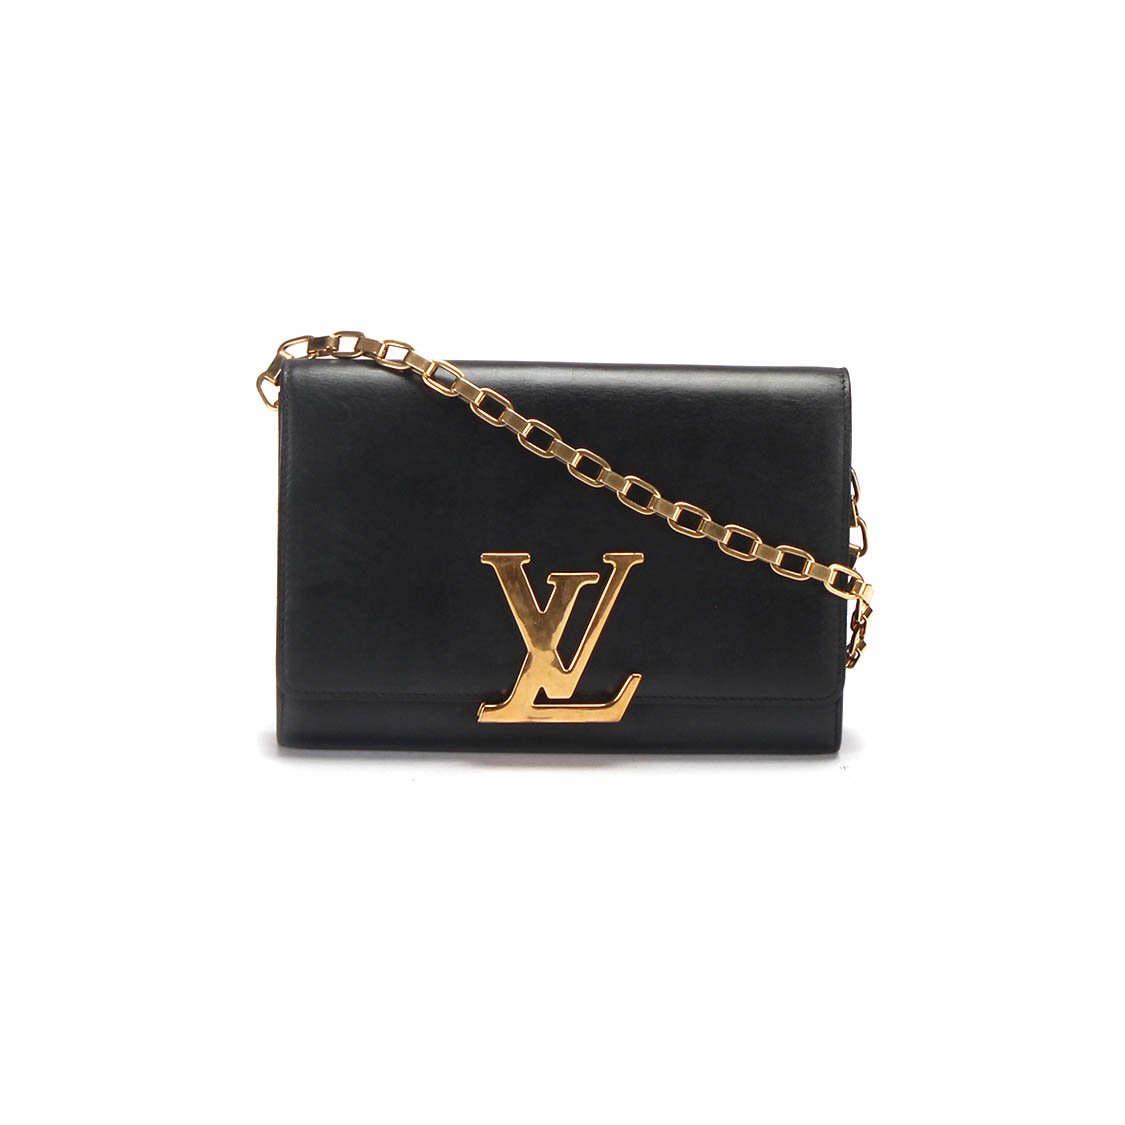 Pre Owned Louis Vuitton Products | The Luxury Flavor